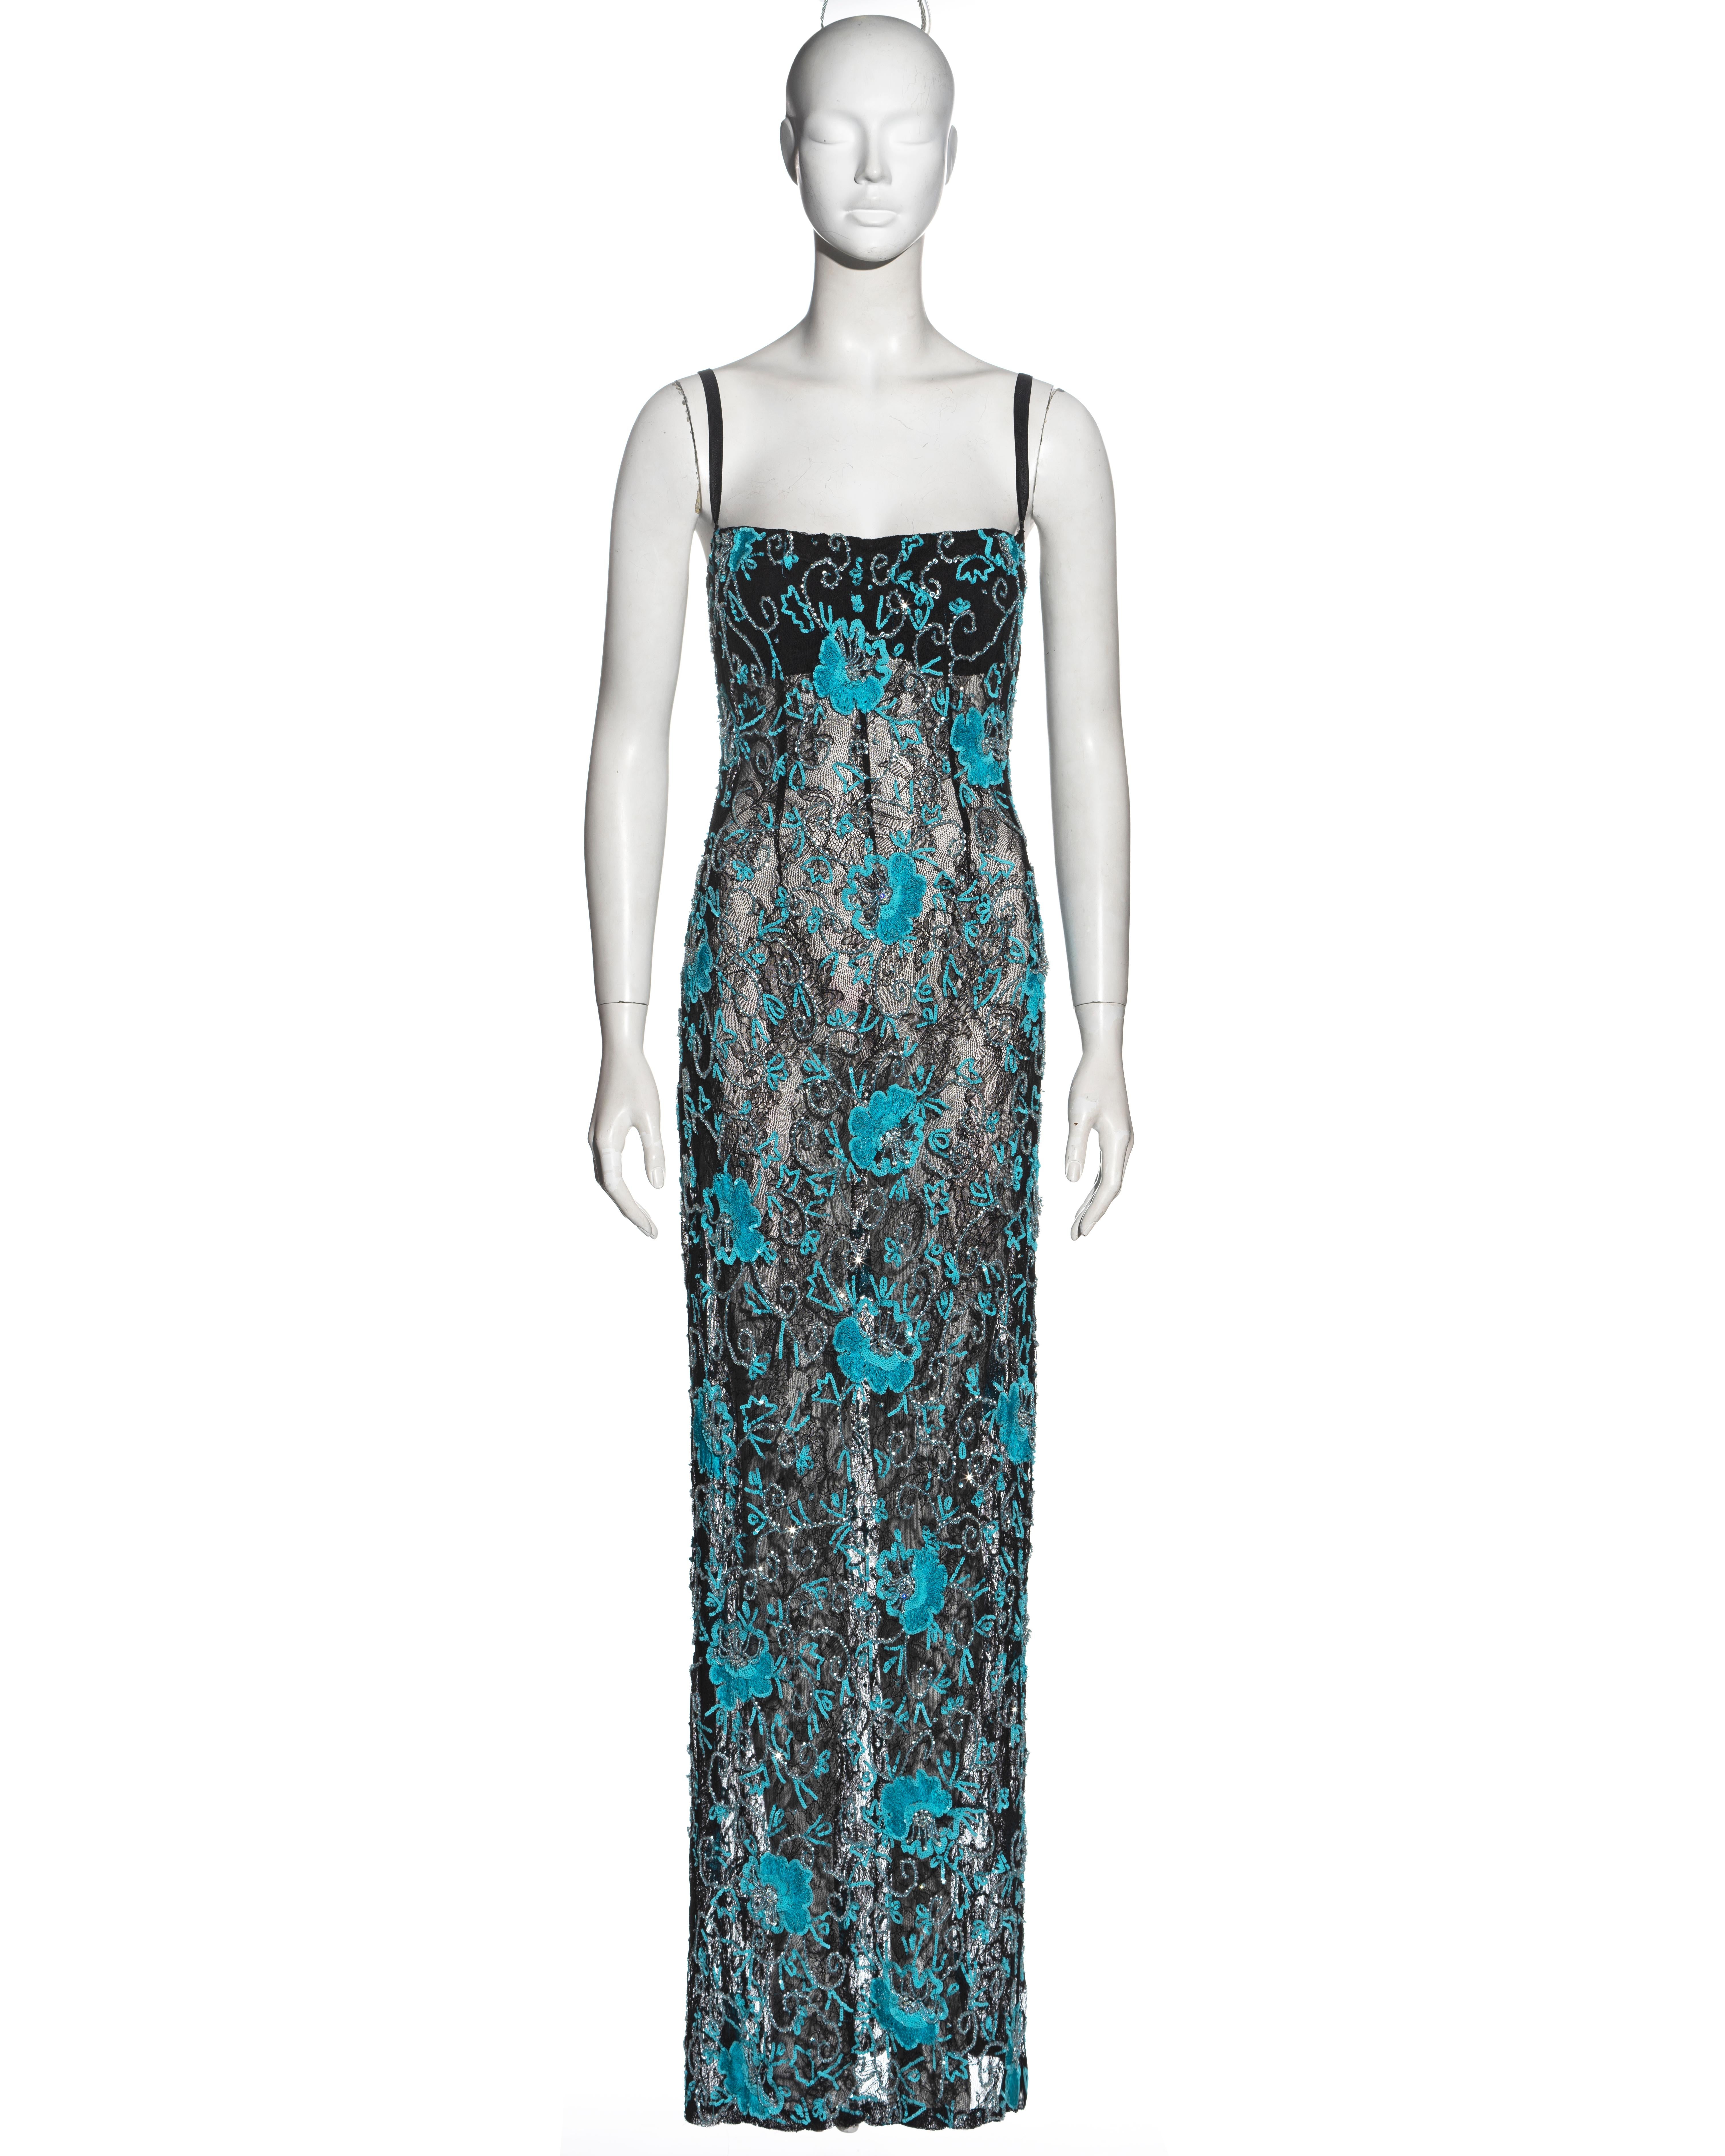 ▪ Dolce & Gabbana black lace evening dress
▪ Turquoise floral embroidery with crystal and sequin embellishments 
▪ Integrated bra with adjustable shoulder straps 
▪ Floor length 
▪ Semi-transparent 
▪ IT 44 - FR 40 - UK 12 - US 8
▪ Fall-Winter